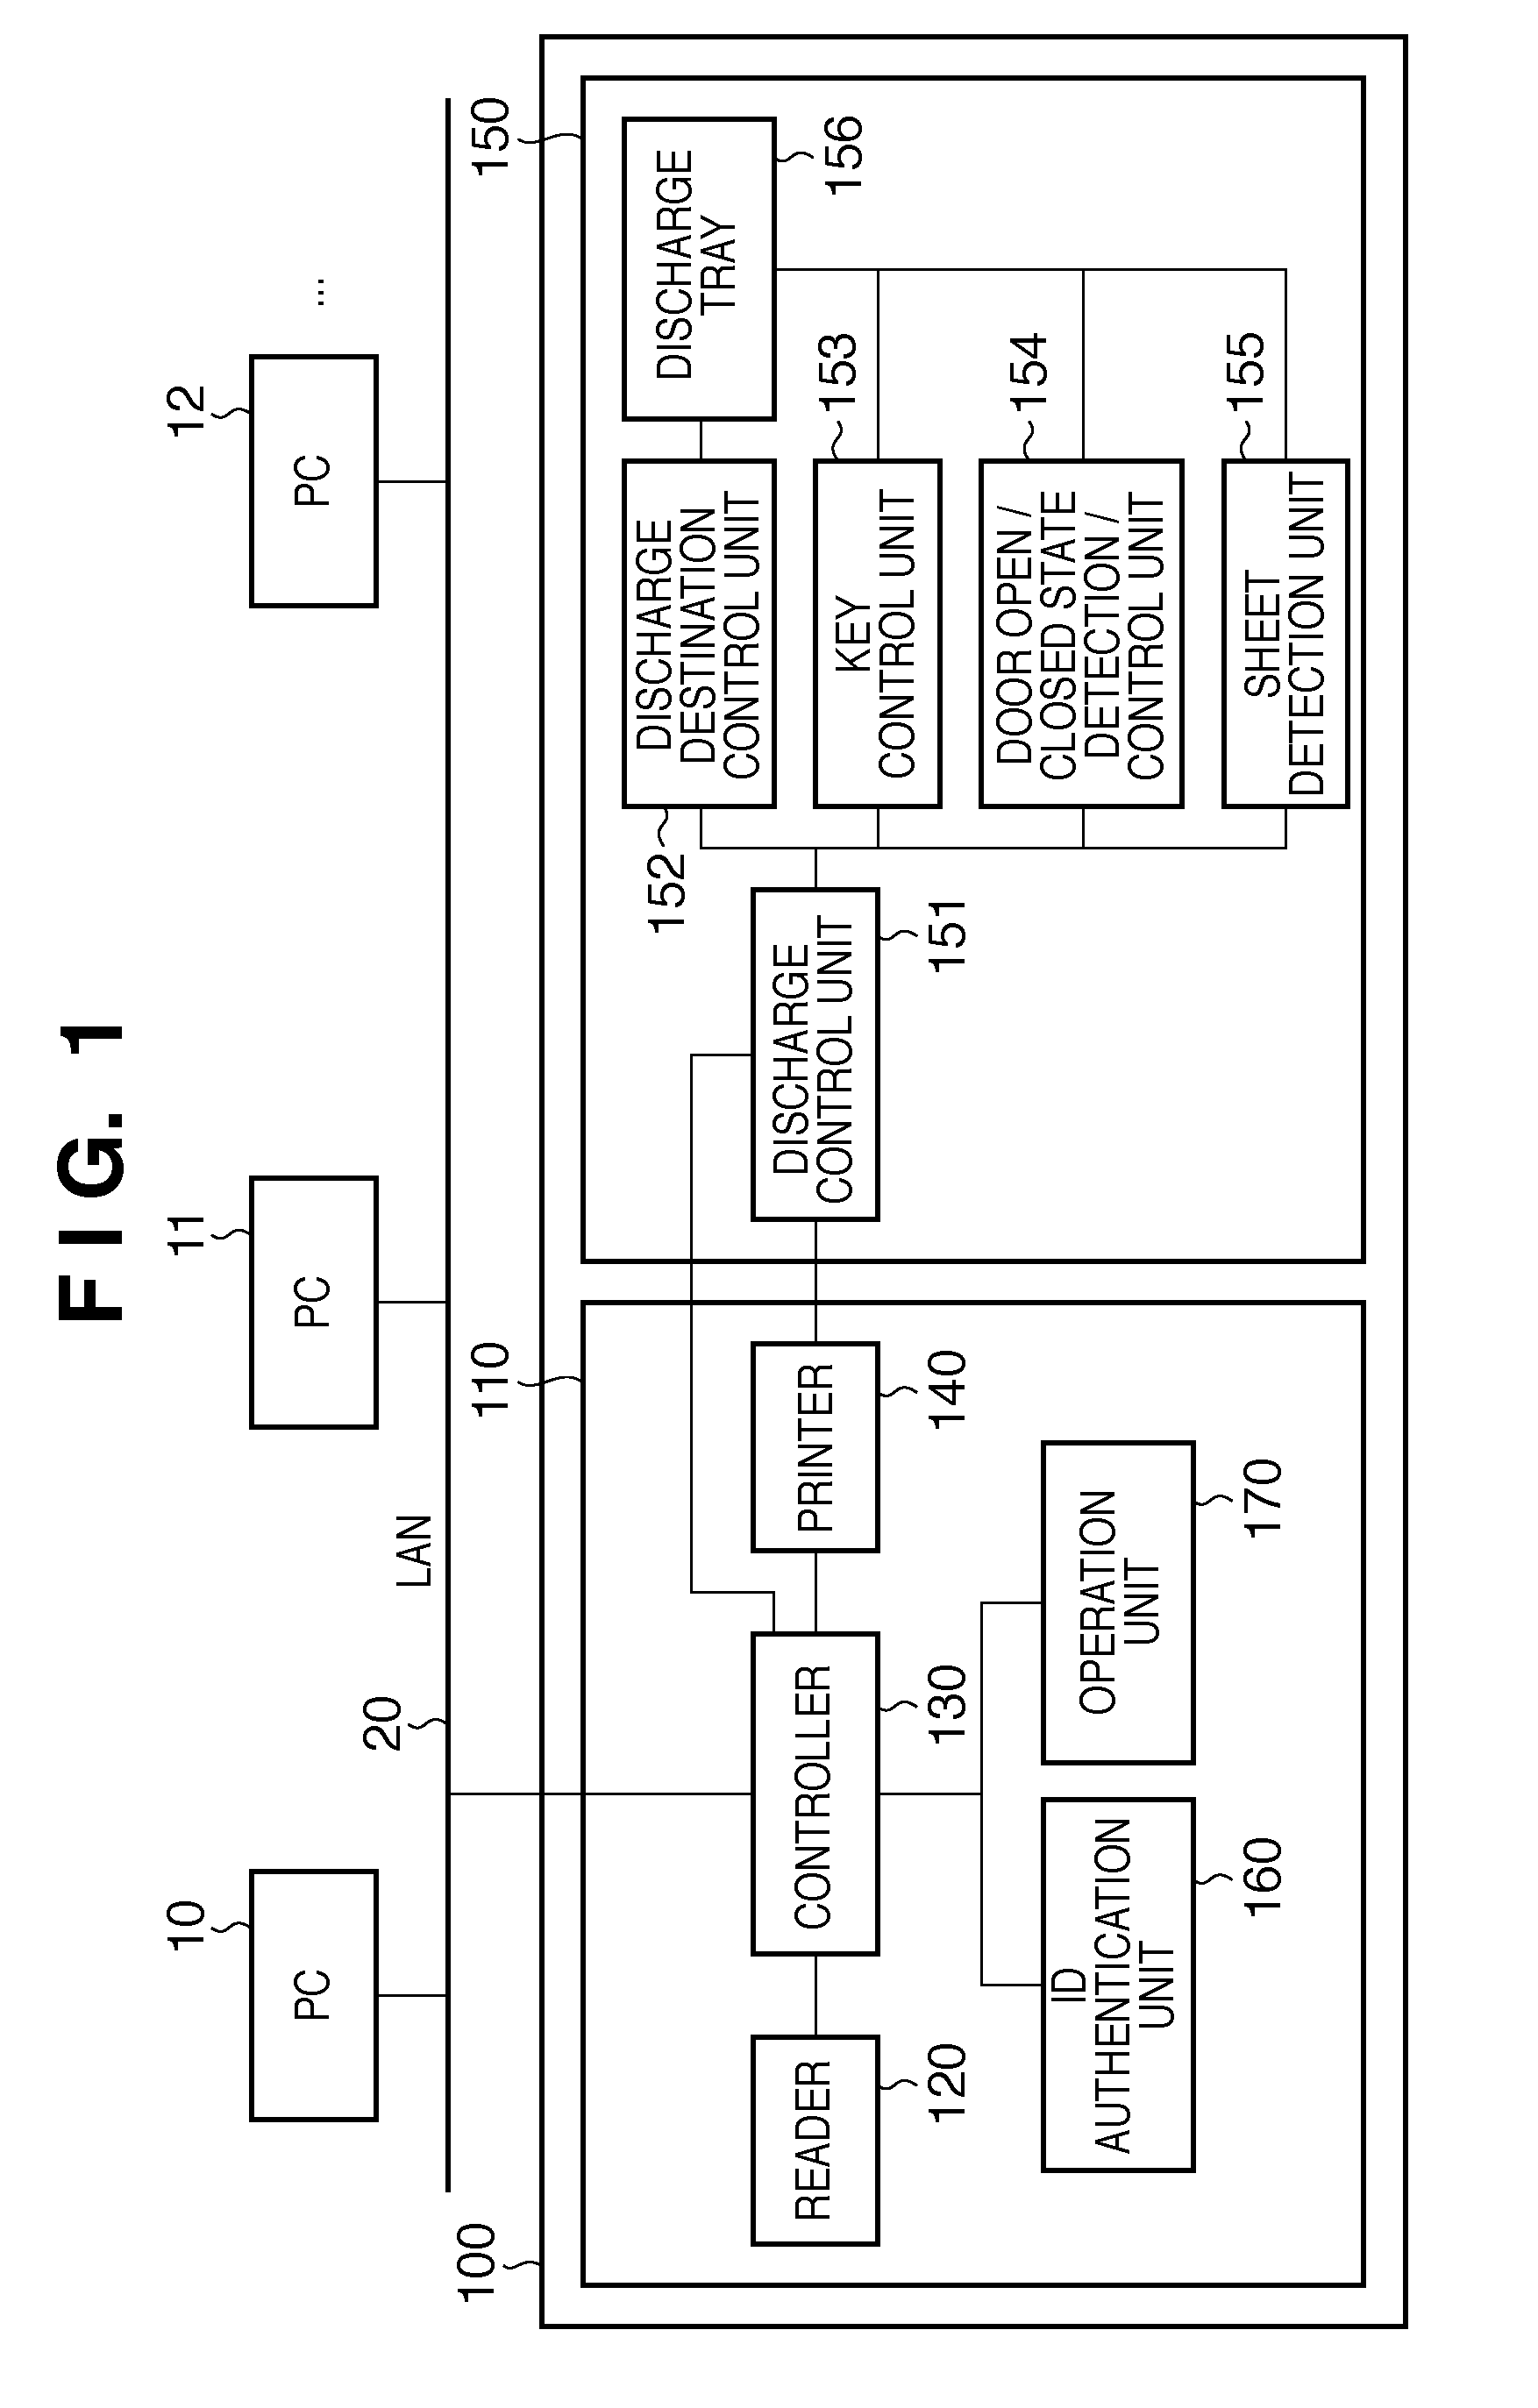 Image forming apparatus, and method performed by image forming apparatus